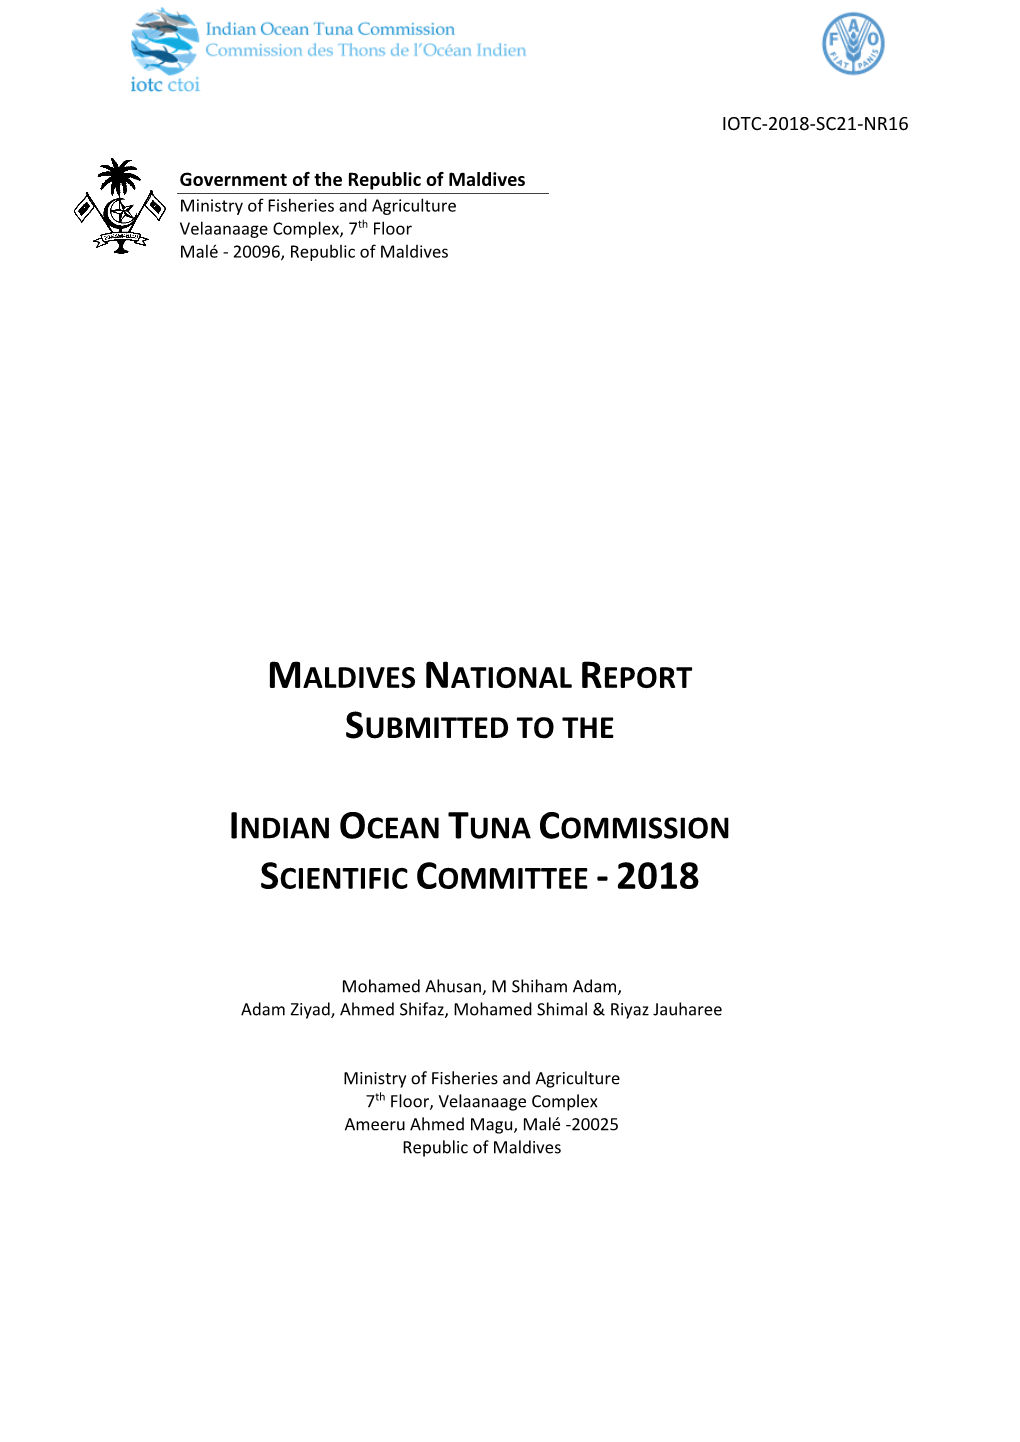 Maldives National Report to IOTC Scientific Committee